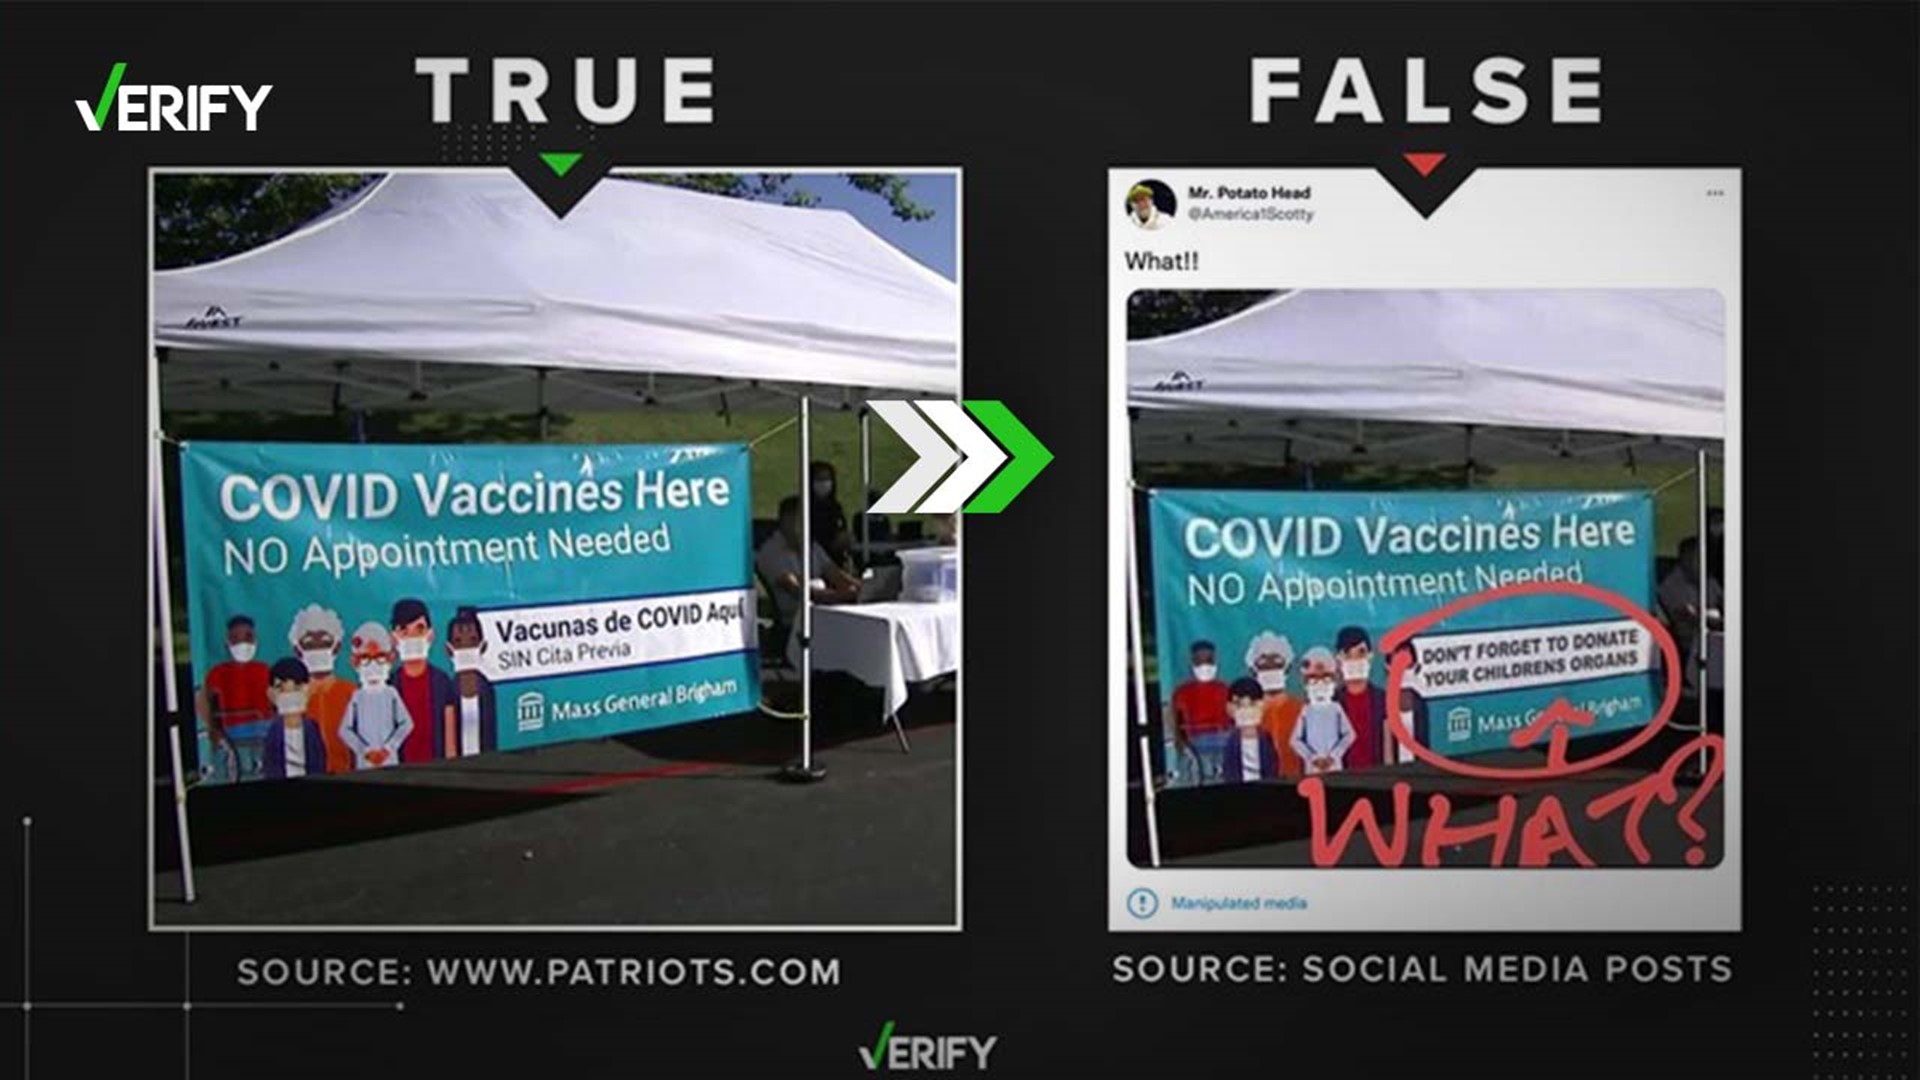 The original photo advertises that COVID-19 vaccines can be found at the tent without an appointment, with a Spanish translation below in the white box.